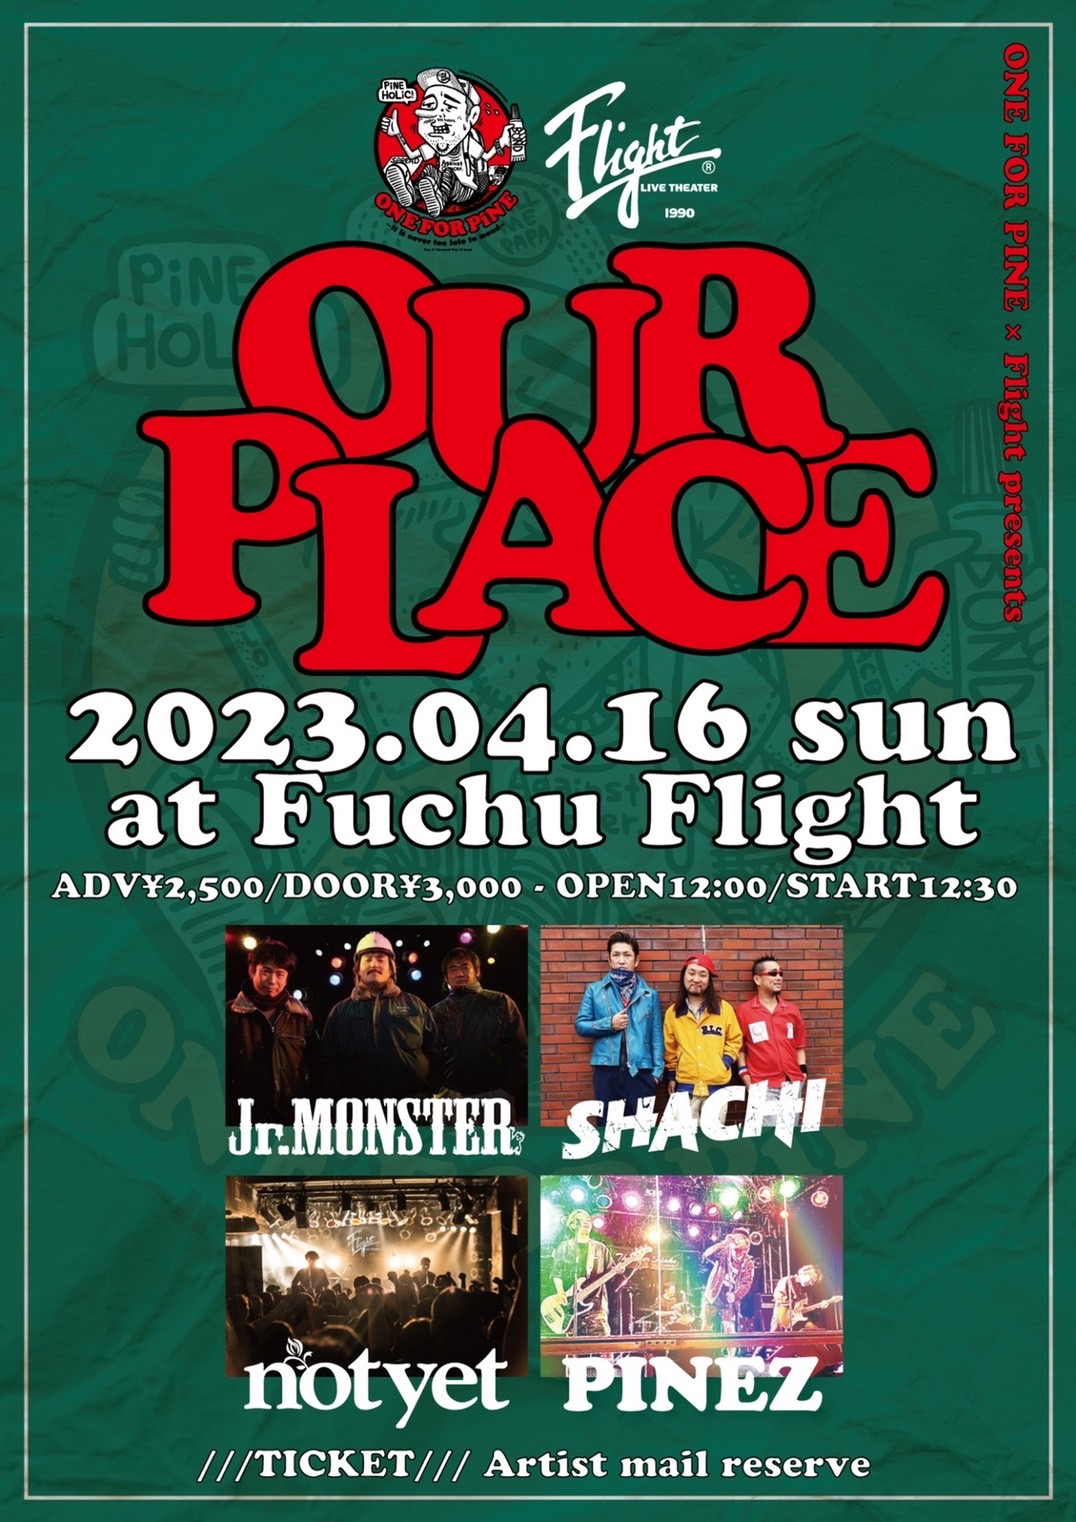 ONE FOR PiNE × Flight pre. OUR PLACE 2023